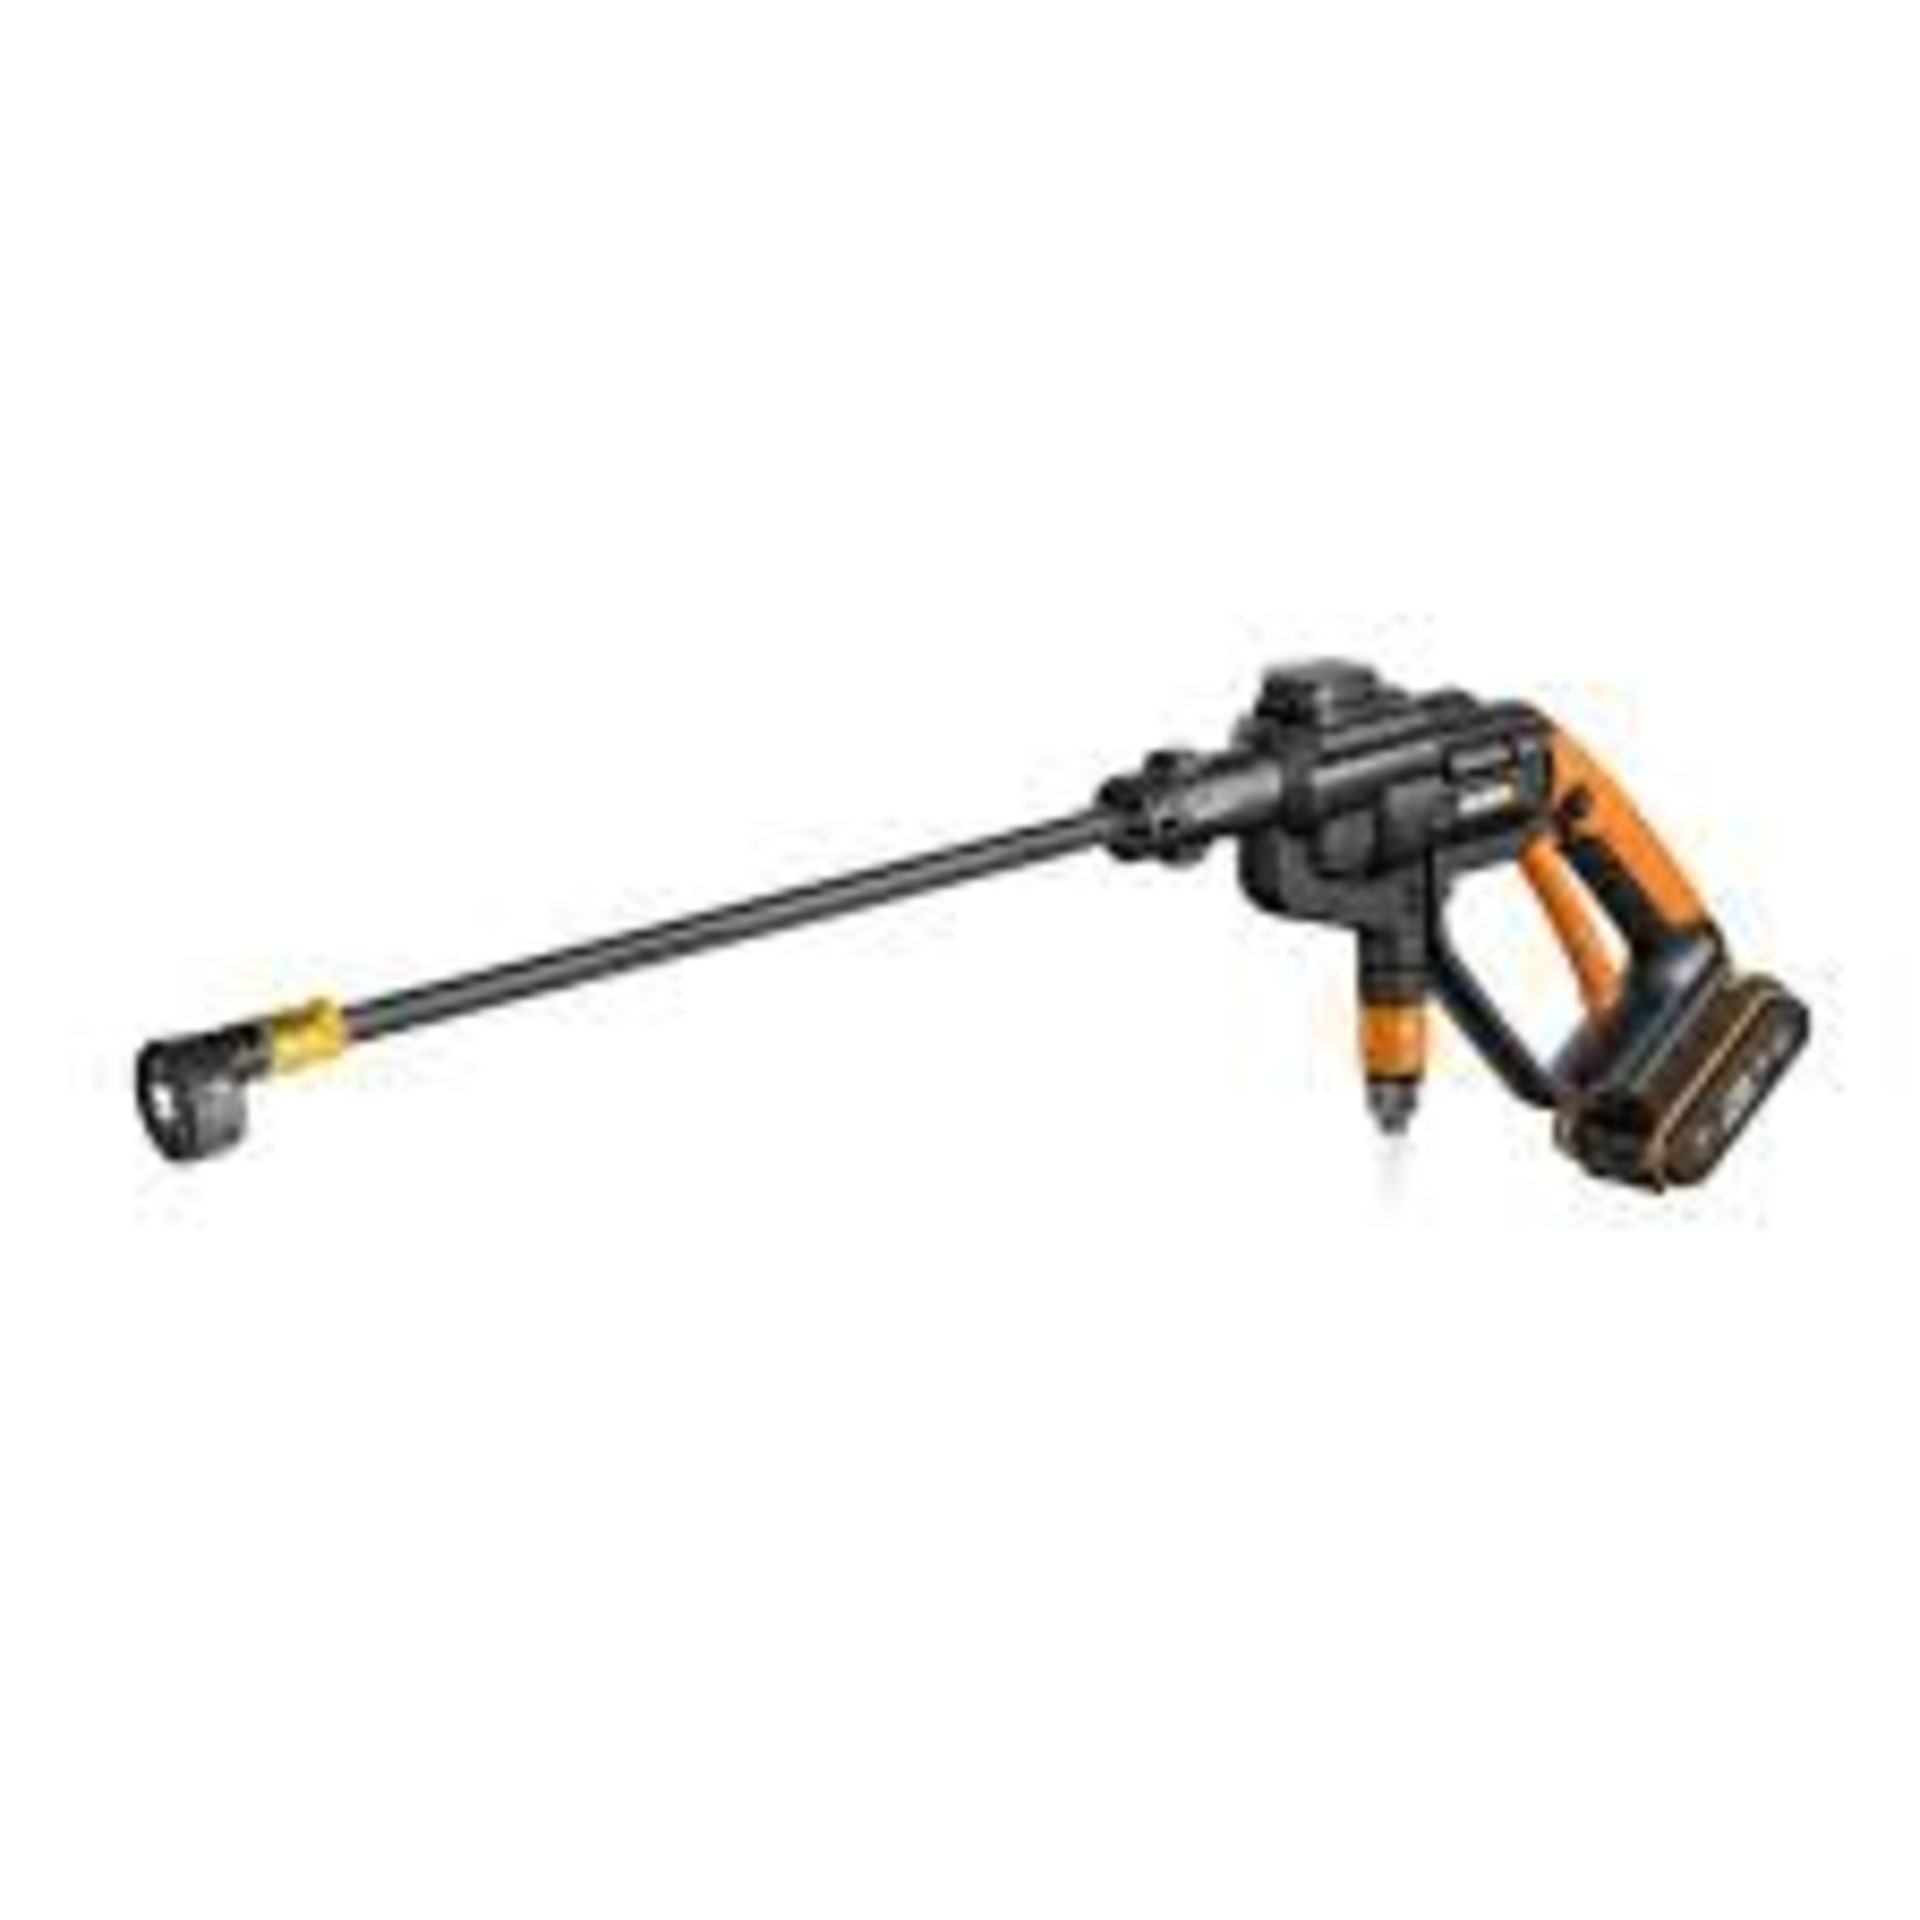 Worx WG620E Hydroshot Cordless Pressure Washer 20V. - R14.10. Dual watering system in one-power